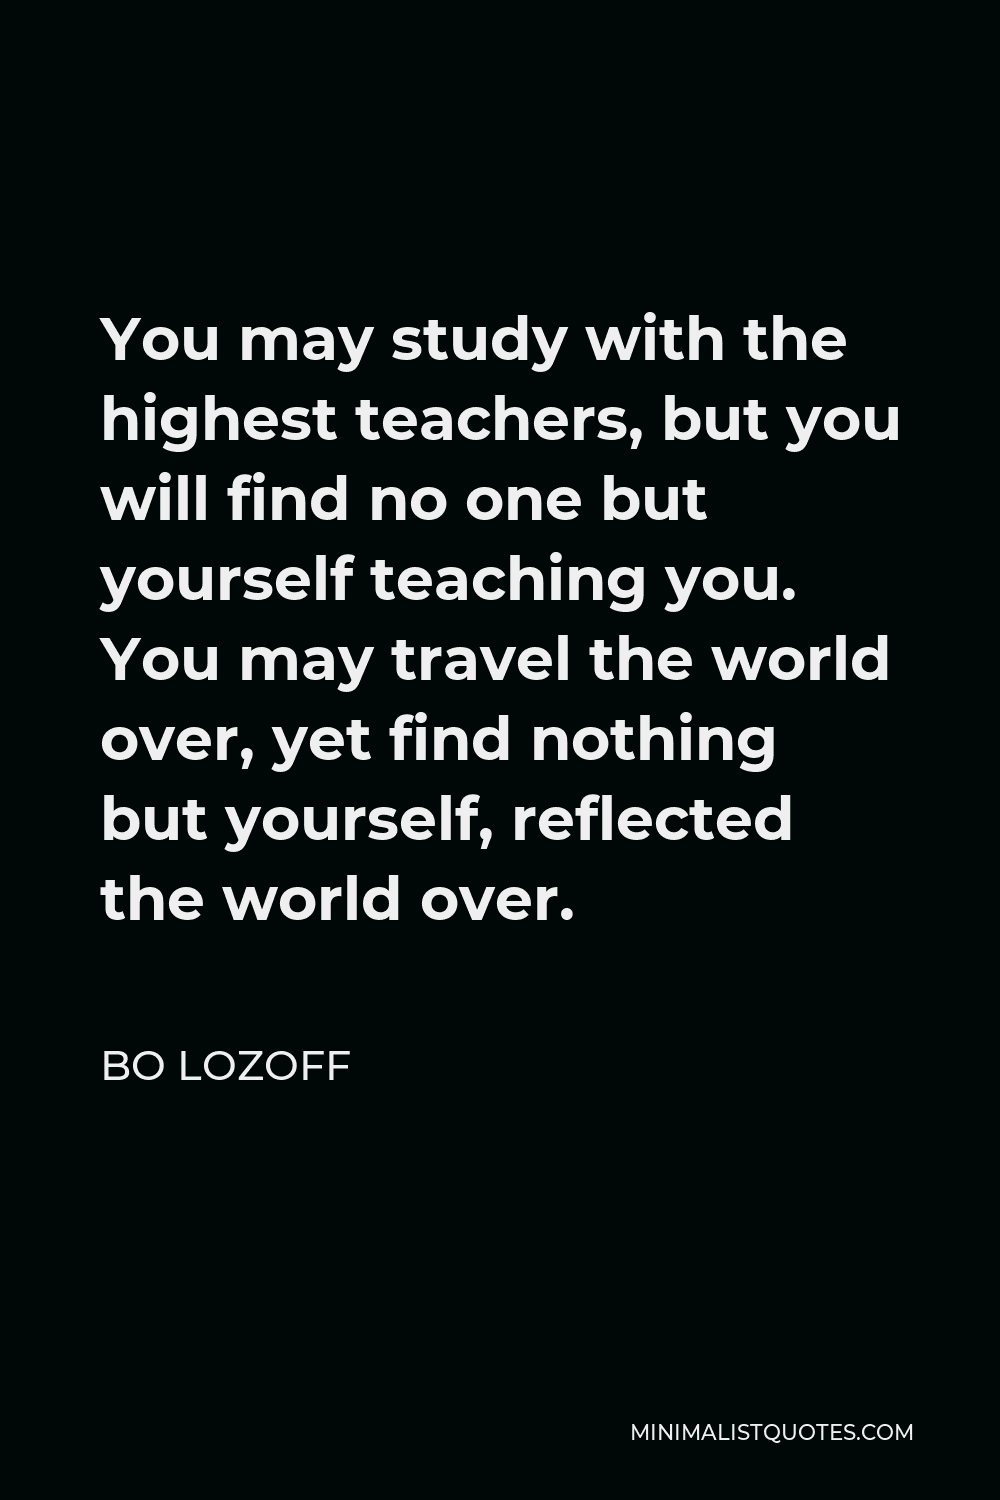 Bo Lozoff Quote - You may study with the highest teachers, but you will find no one but yourself teaching you. You may travel the world over, yet find nothing but yourself, reflected the world over.